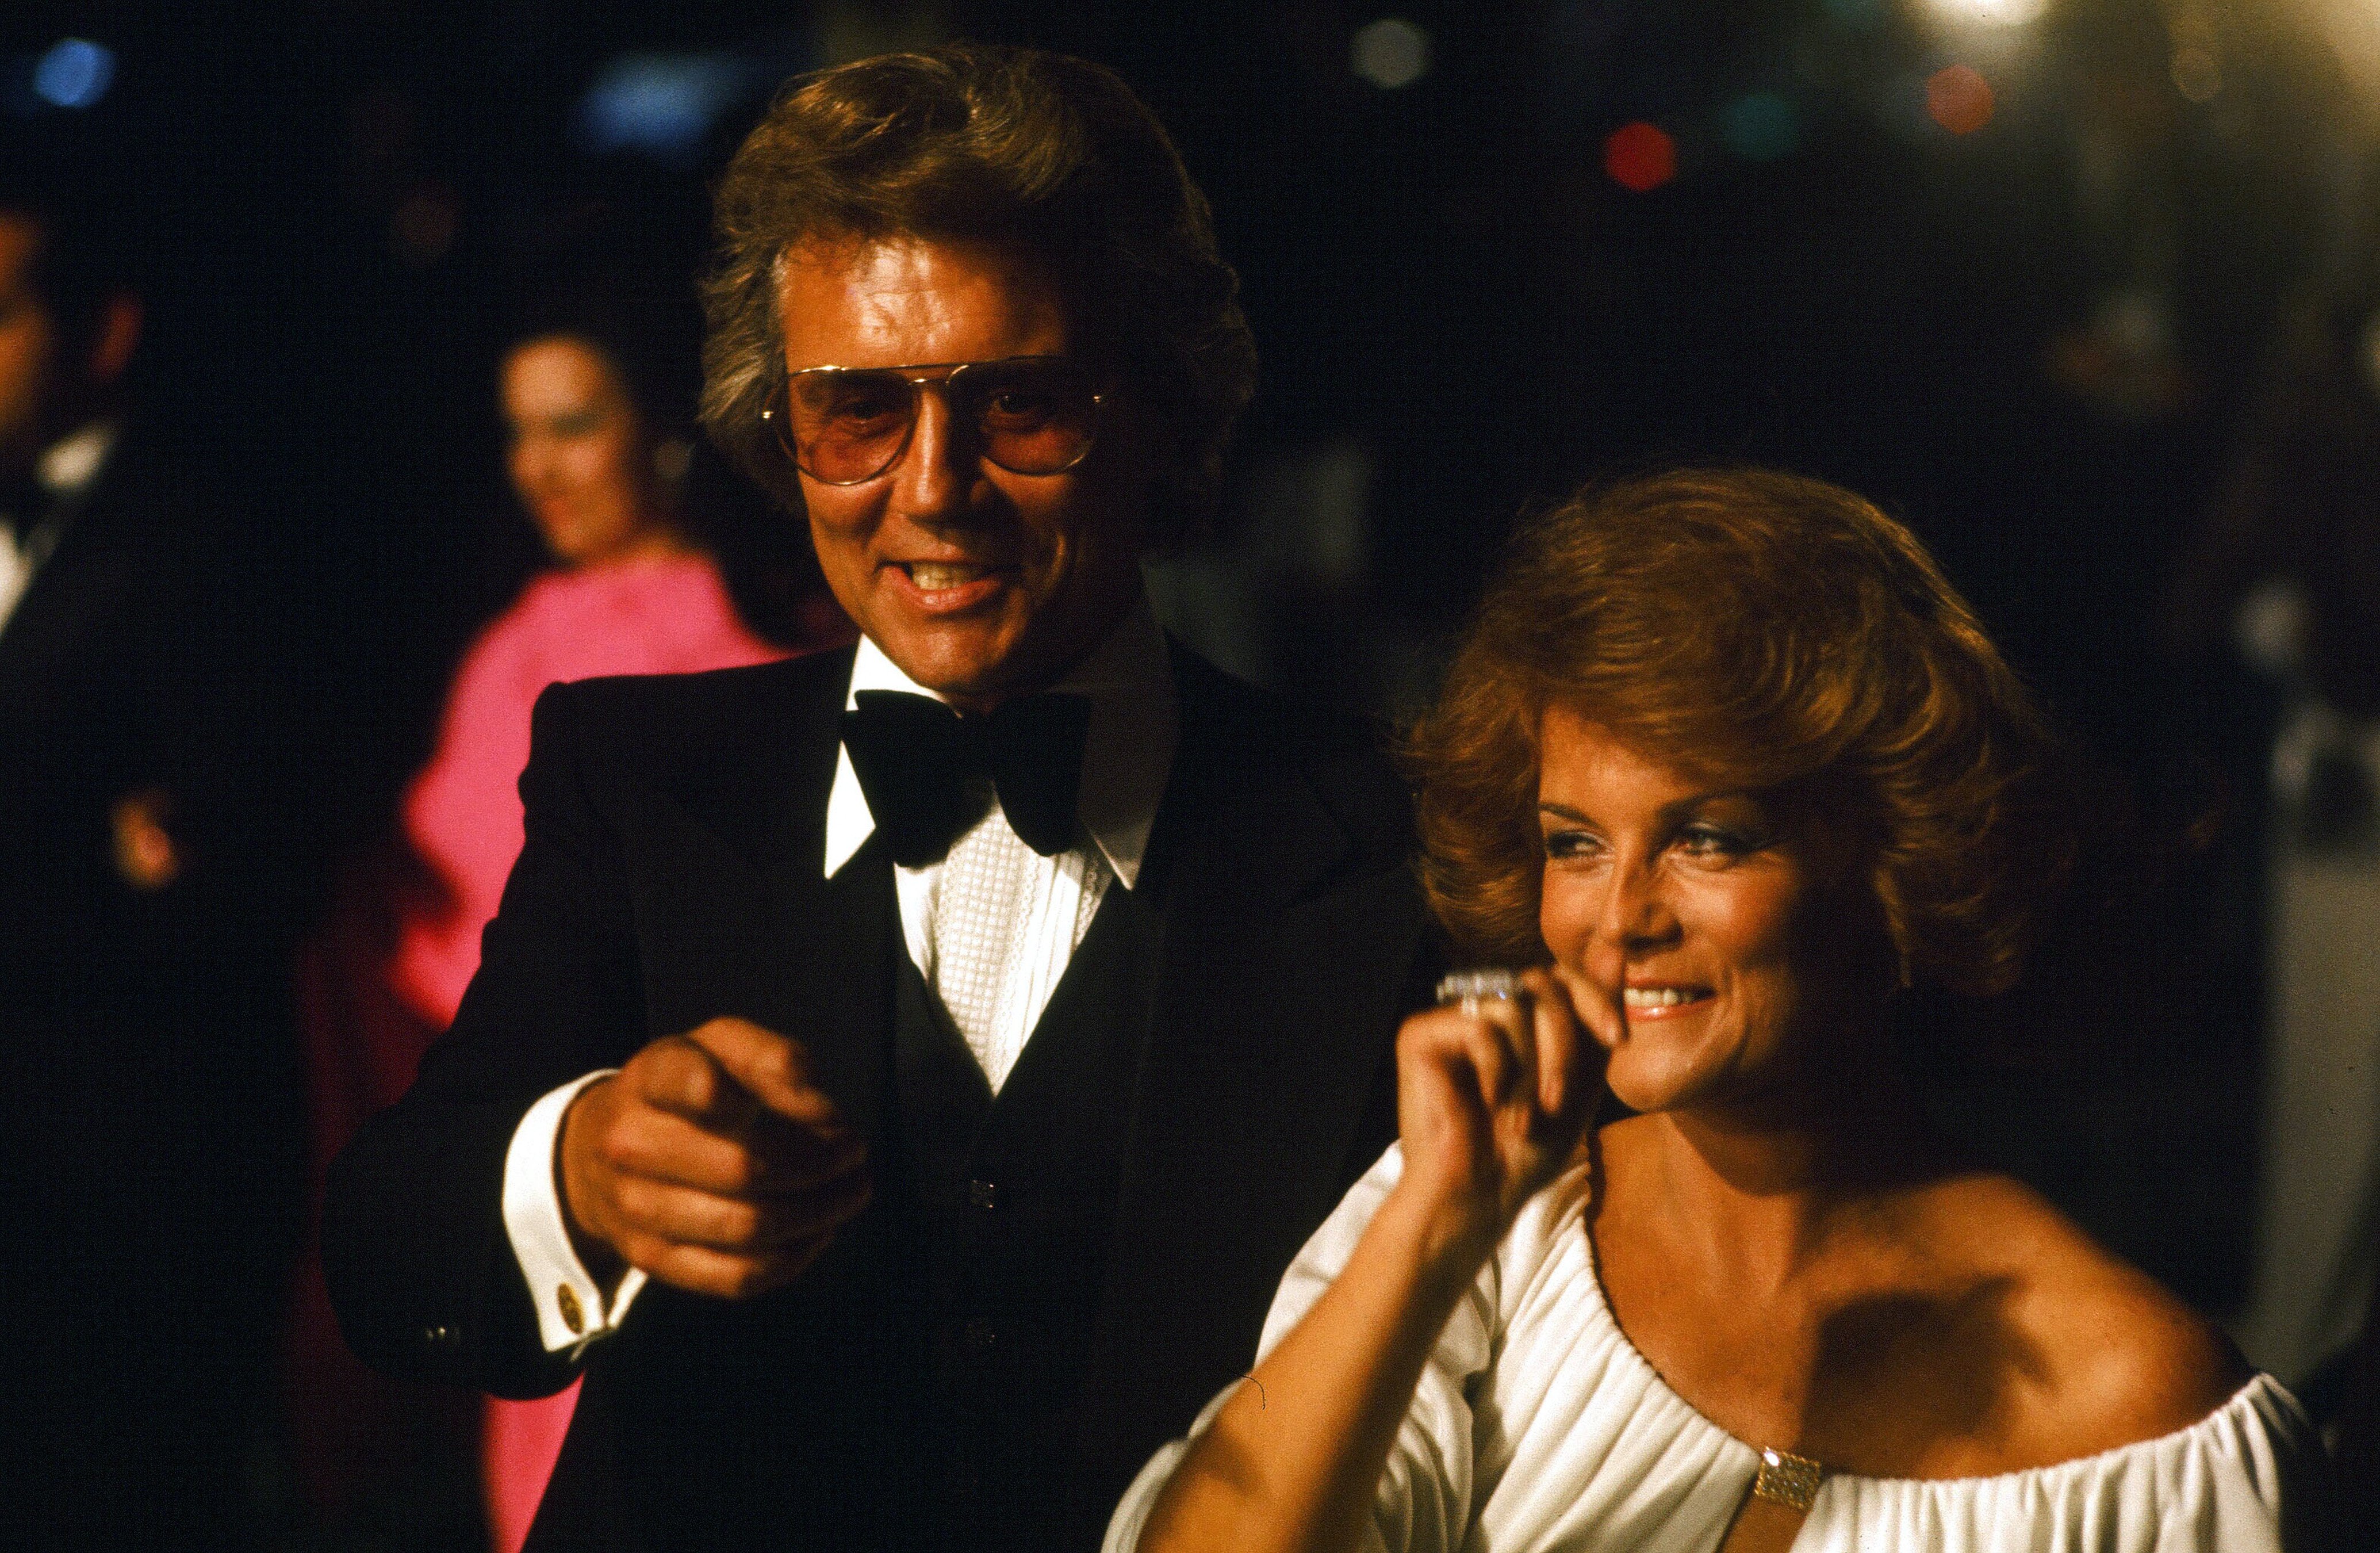 Roger Smith and wife Ann-Margret during the 48th Academy Awards at Dorothy Chandler Pavilion on March 29,1976 in Los Angeles, California. | Source: Getty Images